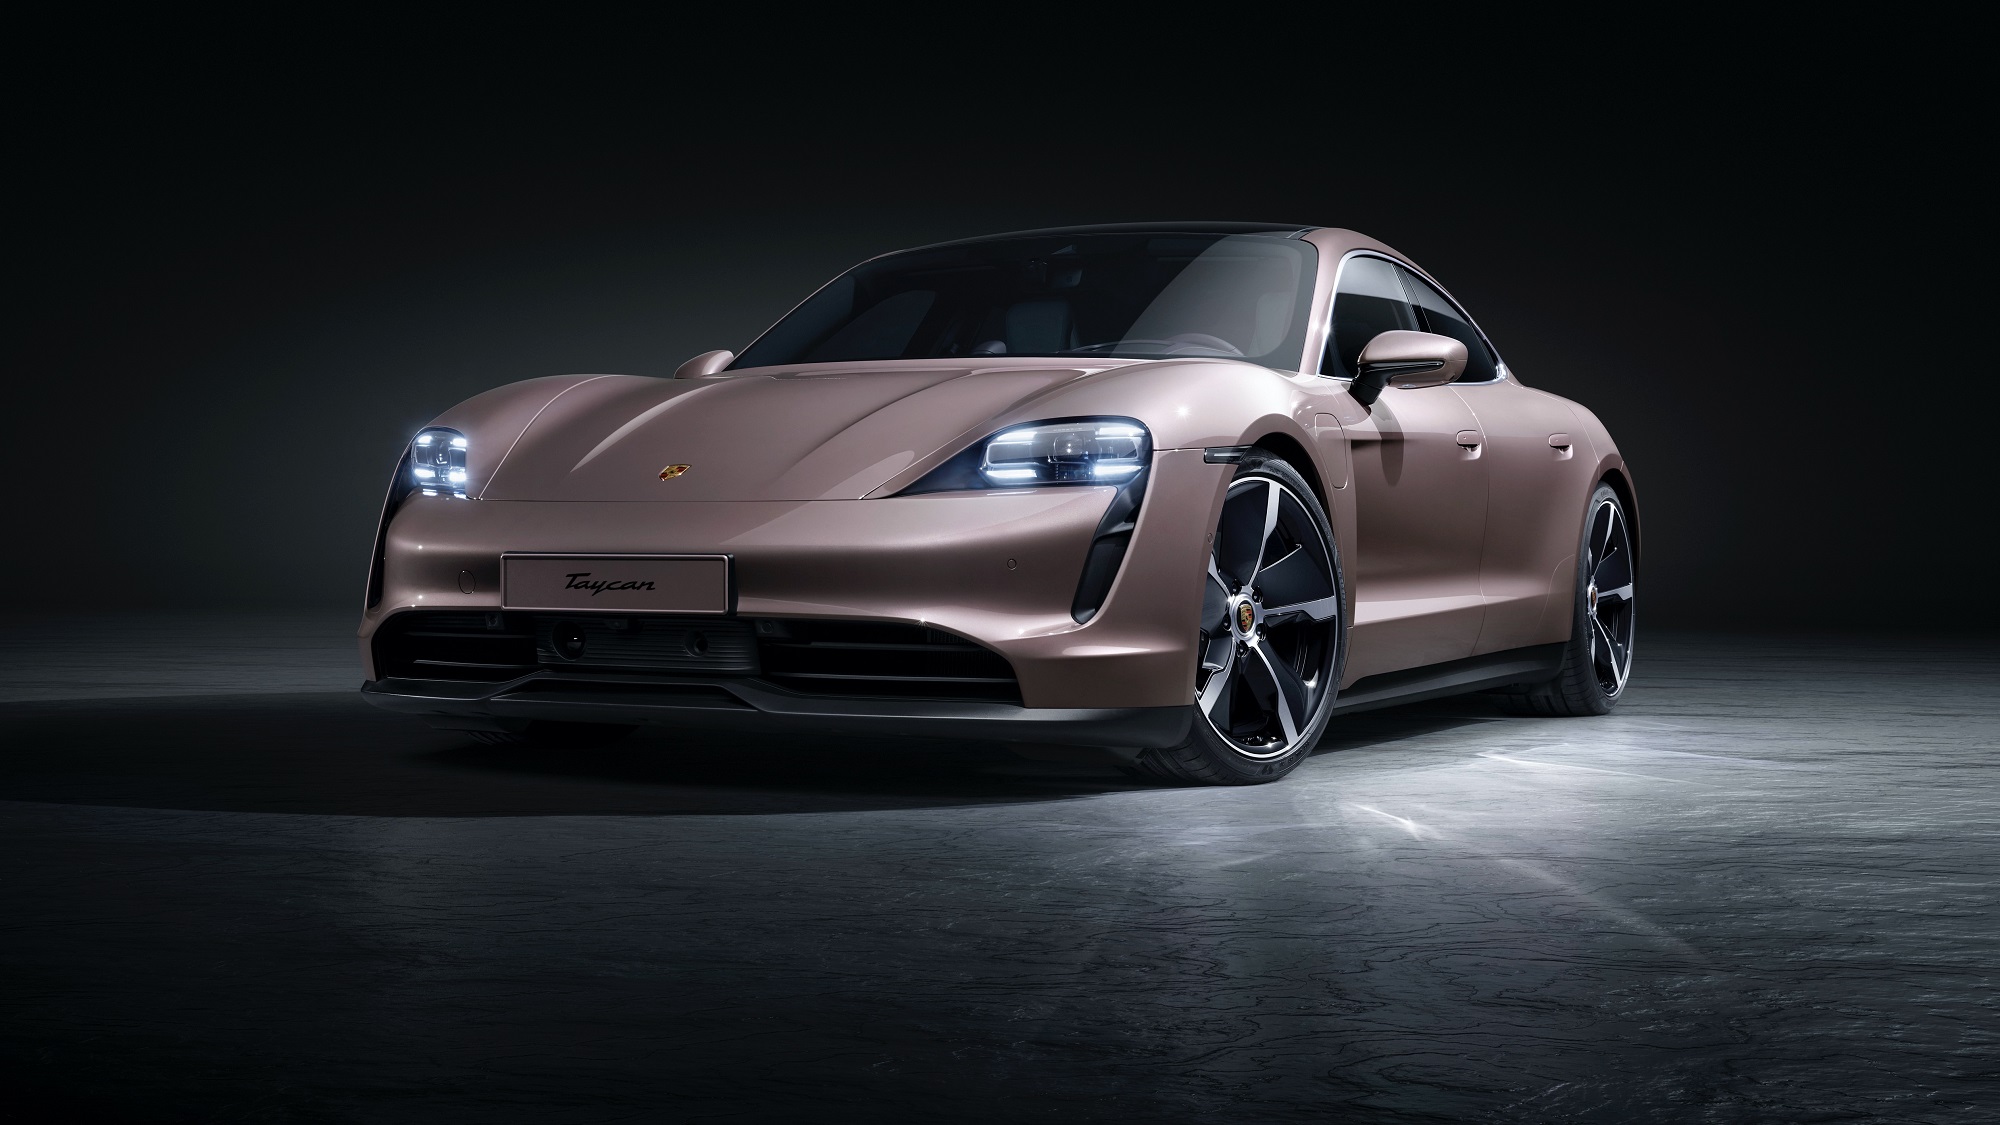 The Porsche Taycan is one of the EVs that hold the most value and depreciates the least in the British market.